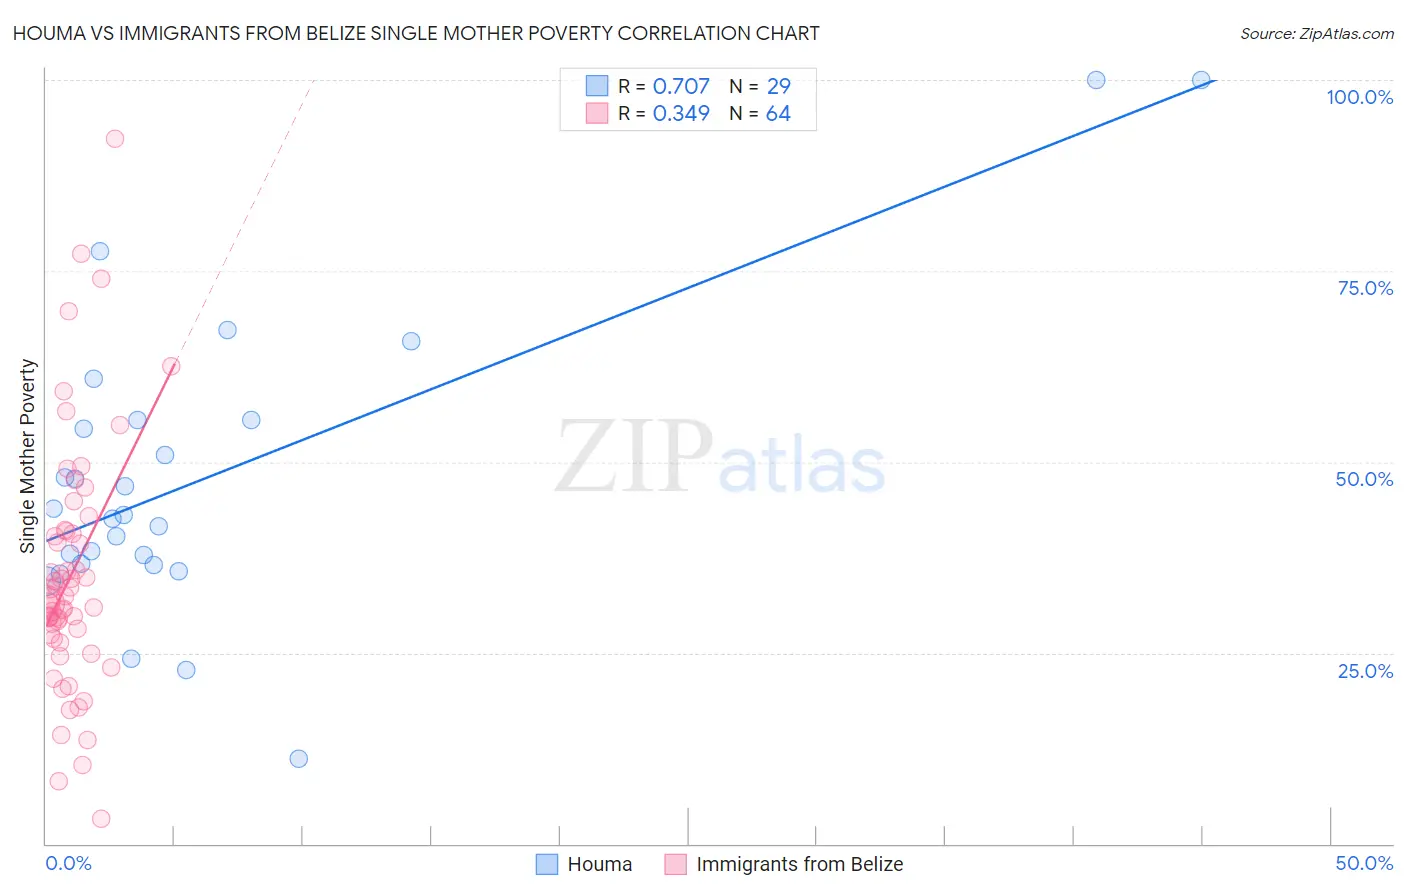 Houma vs Immigrants from Belize Single Mother Poverty